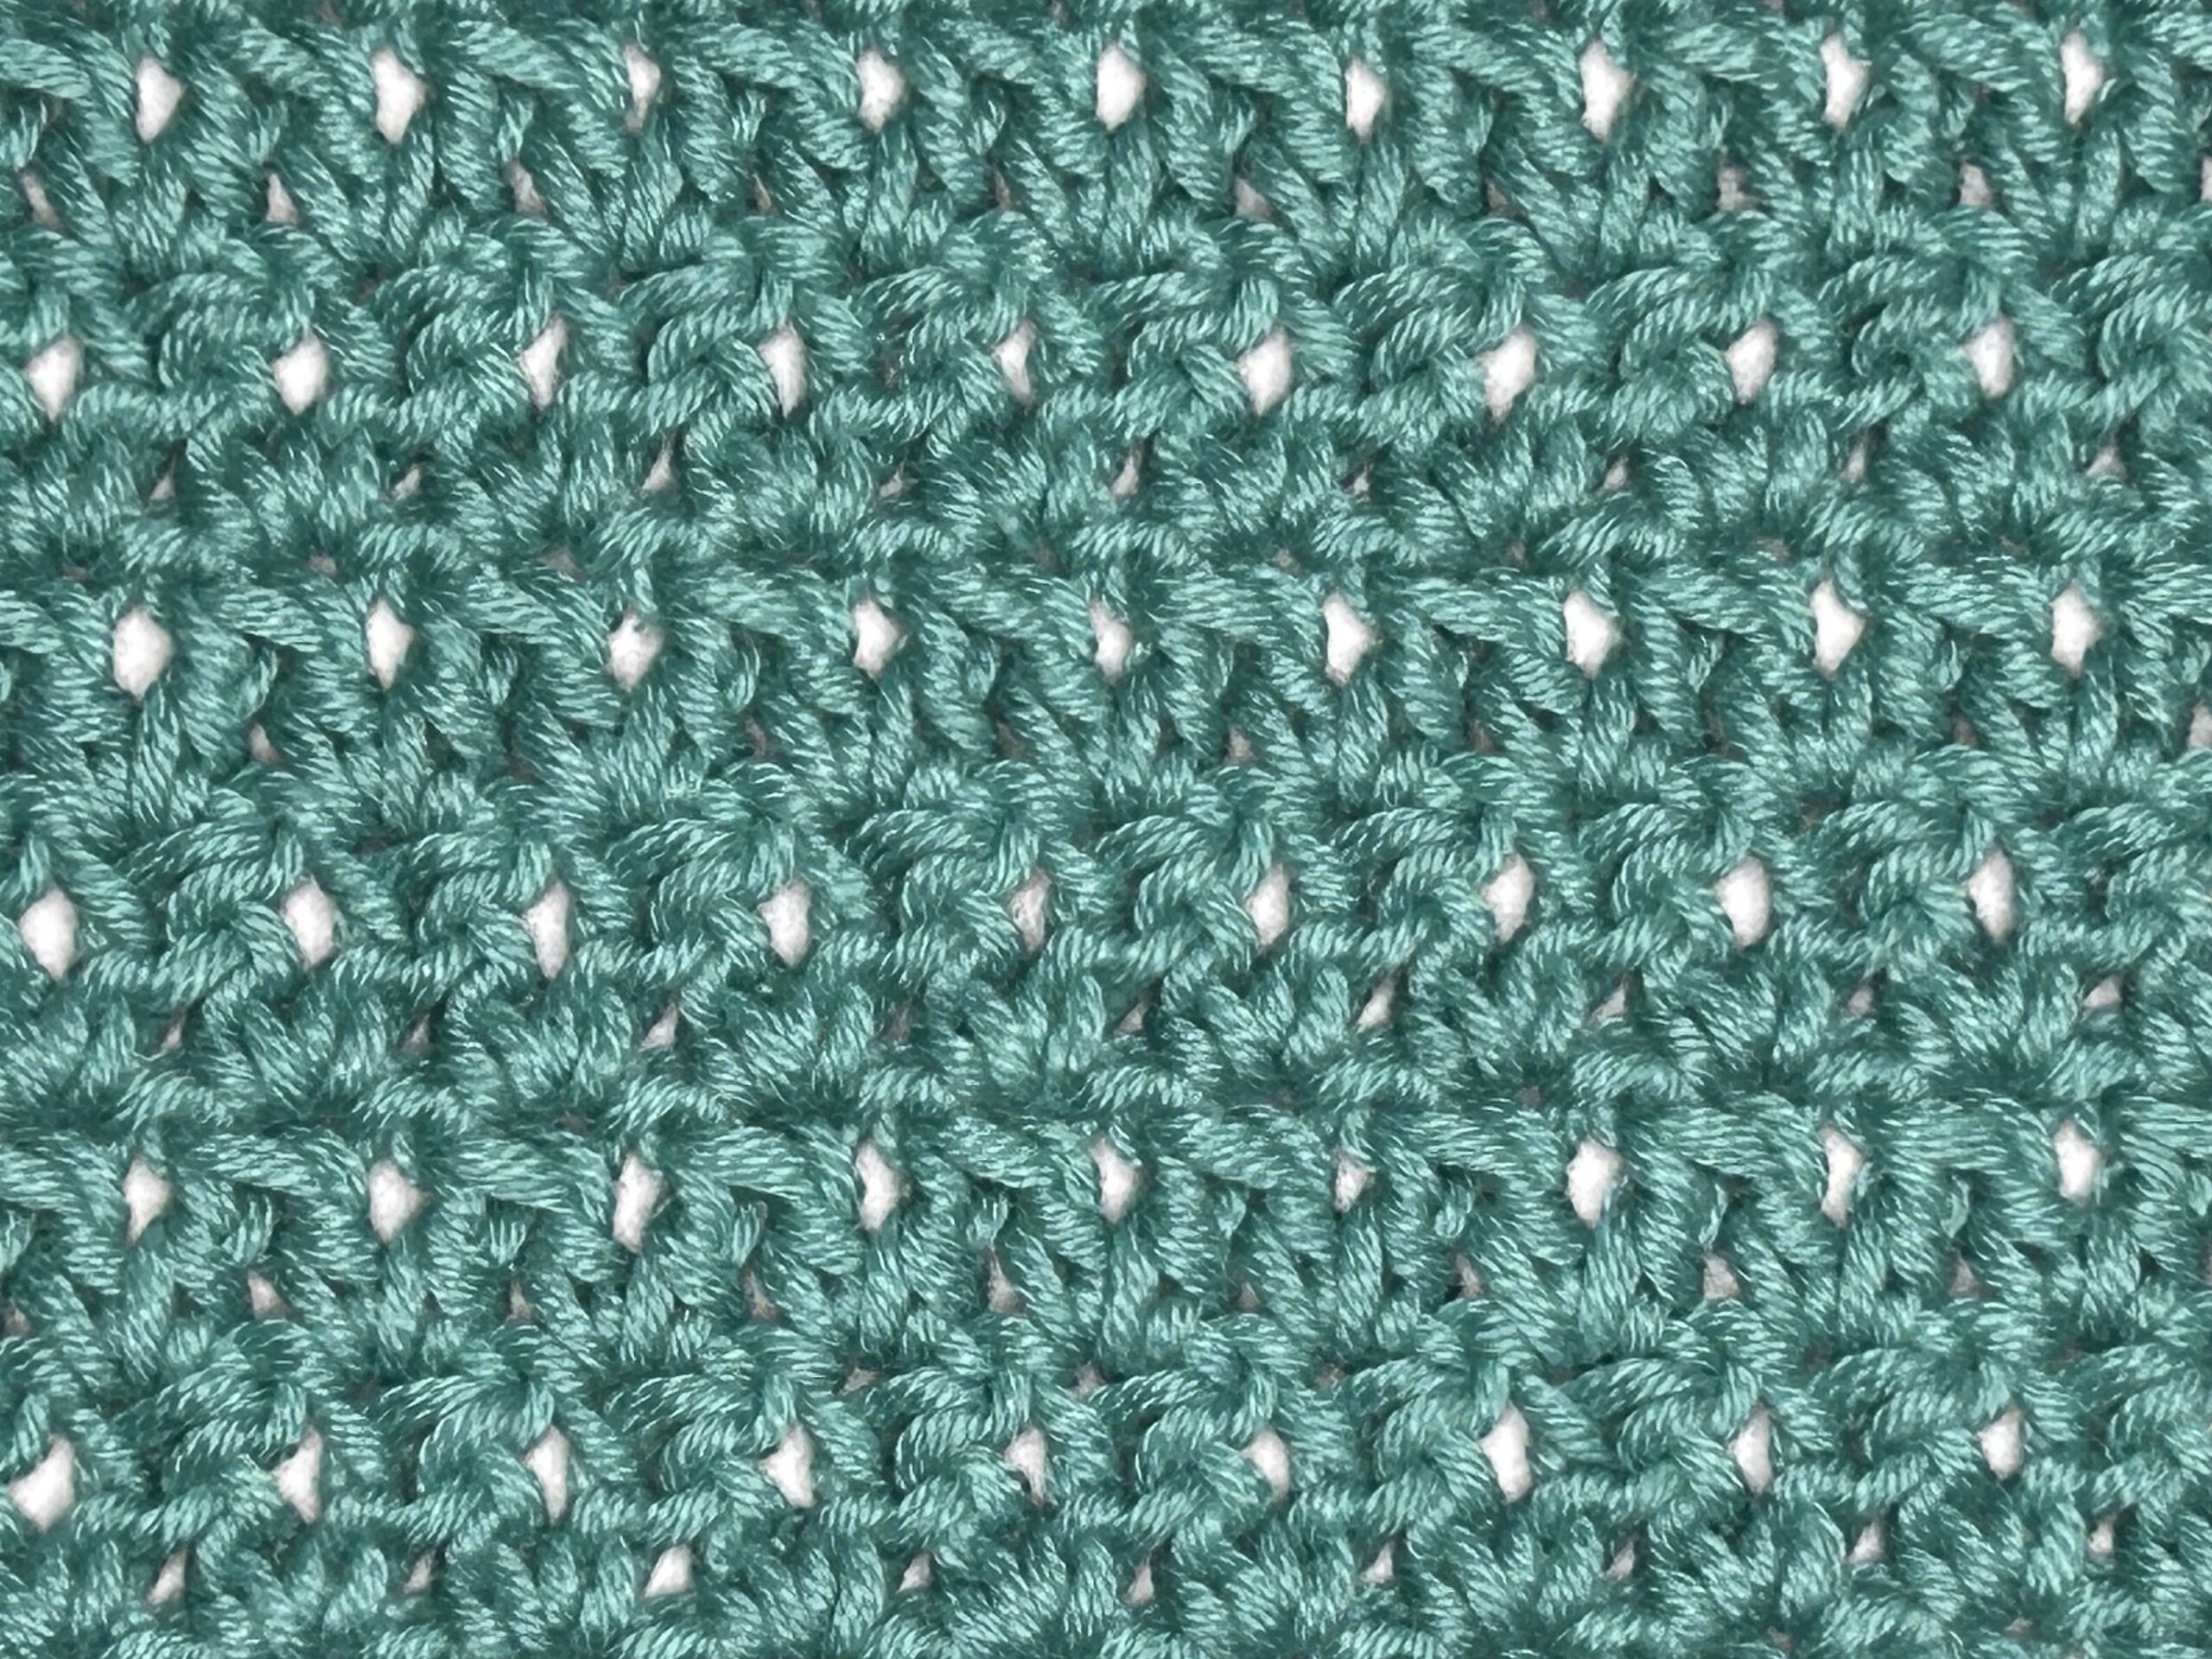 Rows of green cane stitches